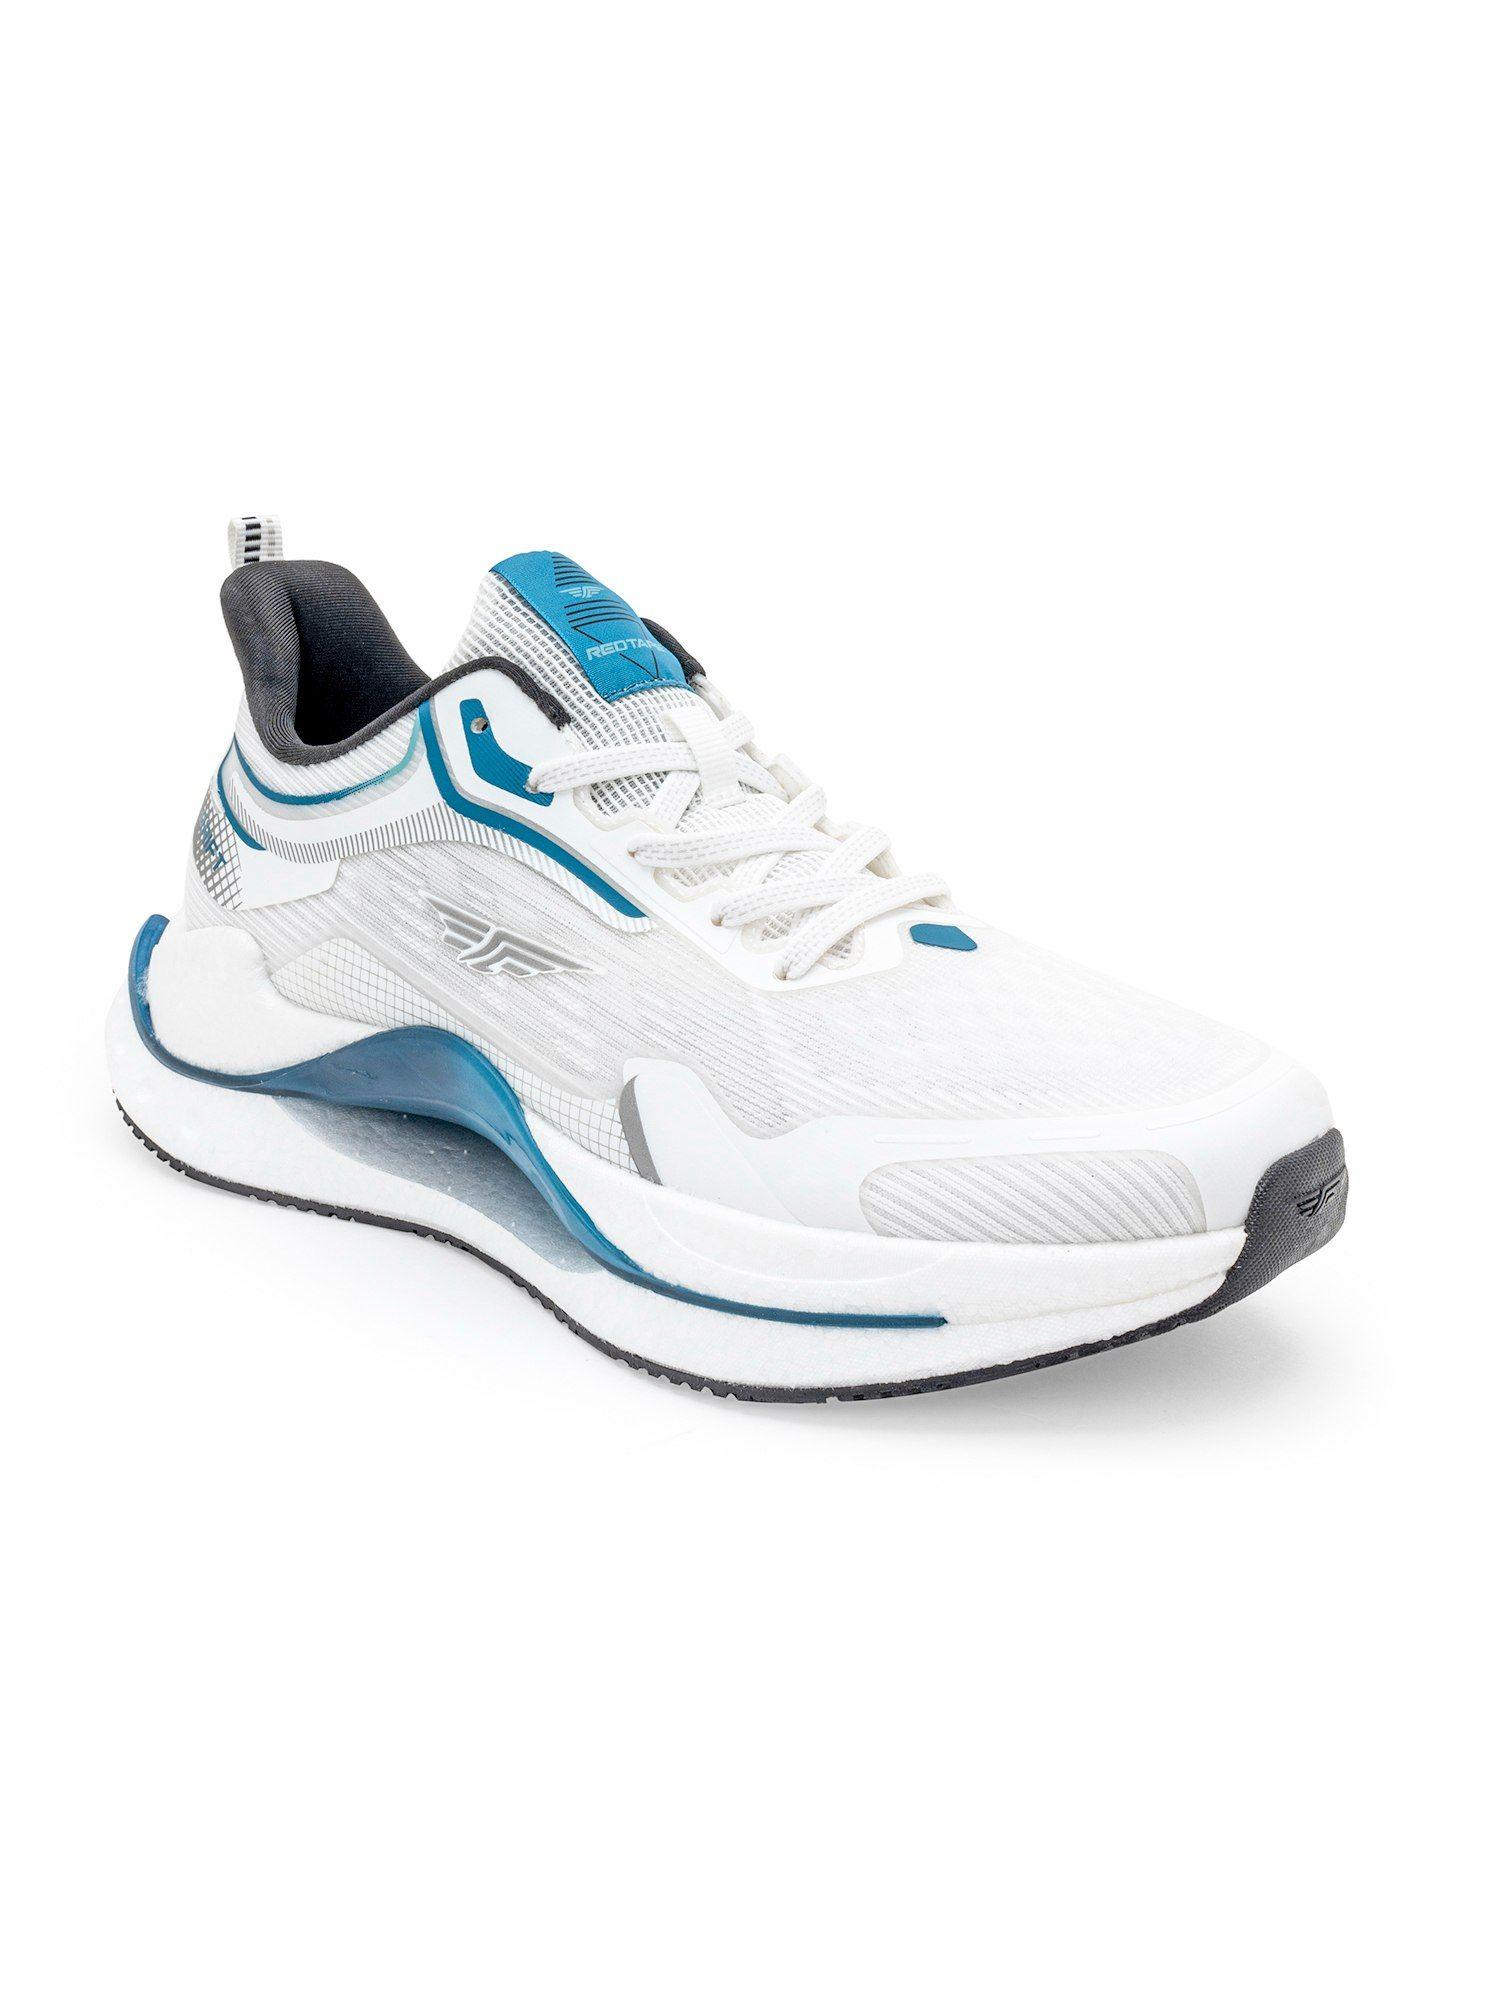 mens textured white-blue walking shoes